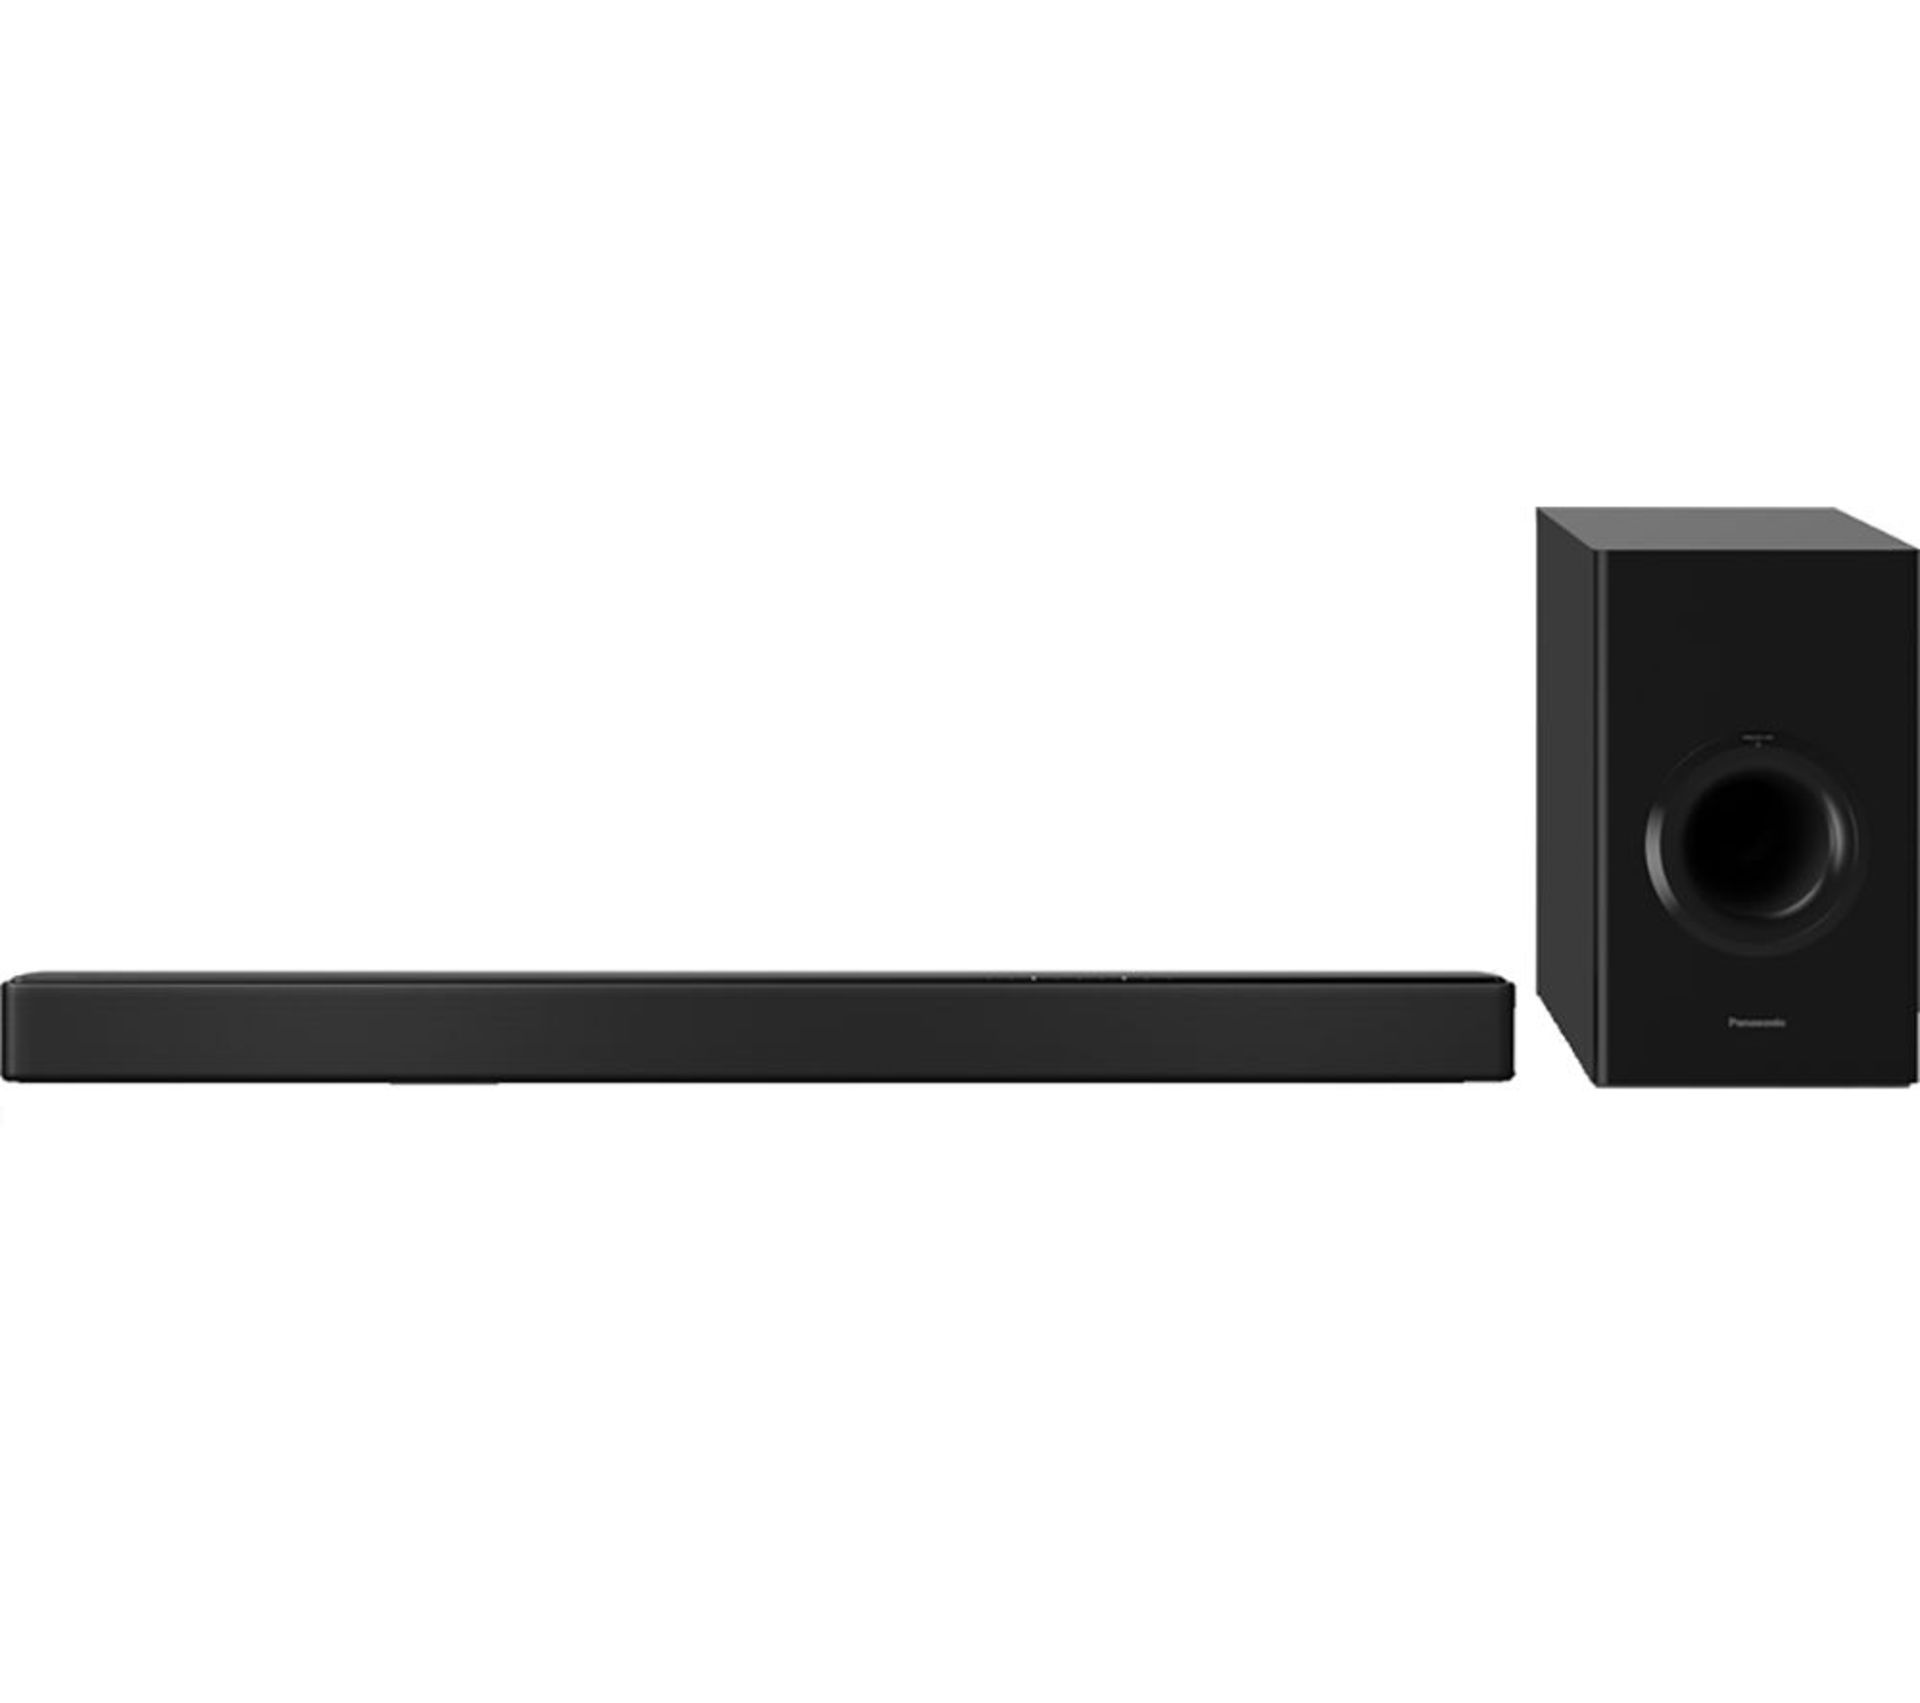 1 PANASONIC SC-HTB498 2.1CH SOUNDBAR AND WIRELESS SUB WOOFER WITH REMOTE CONTROL RRP Â£179.99 - Image 2 of 2